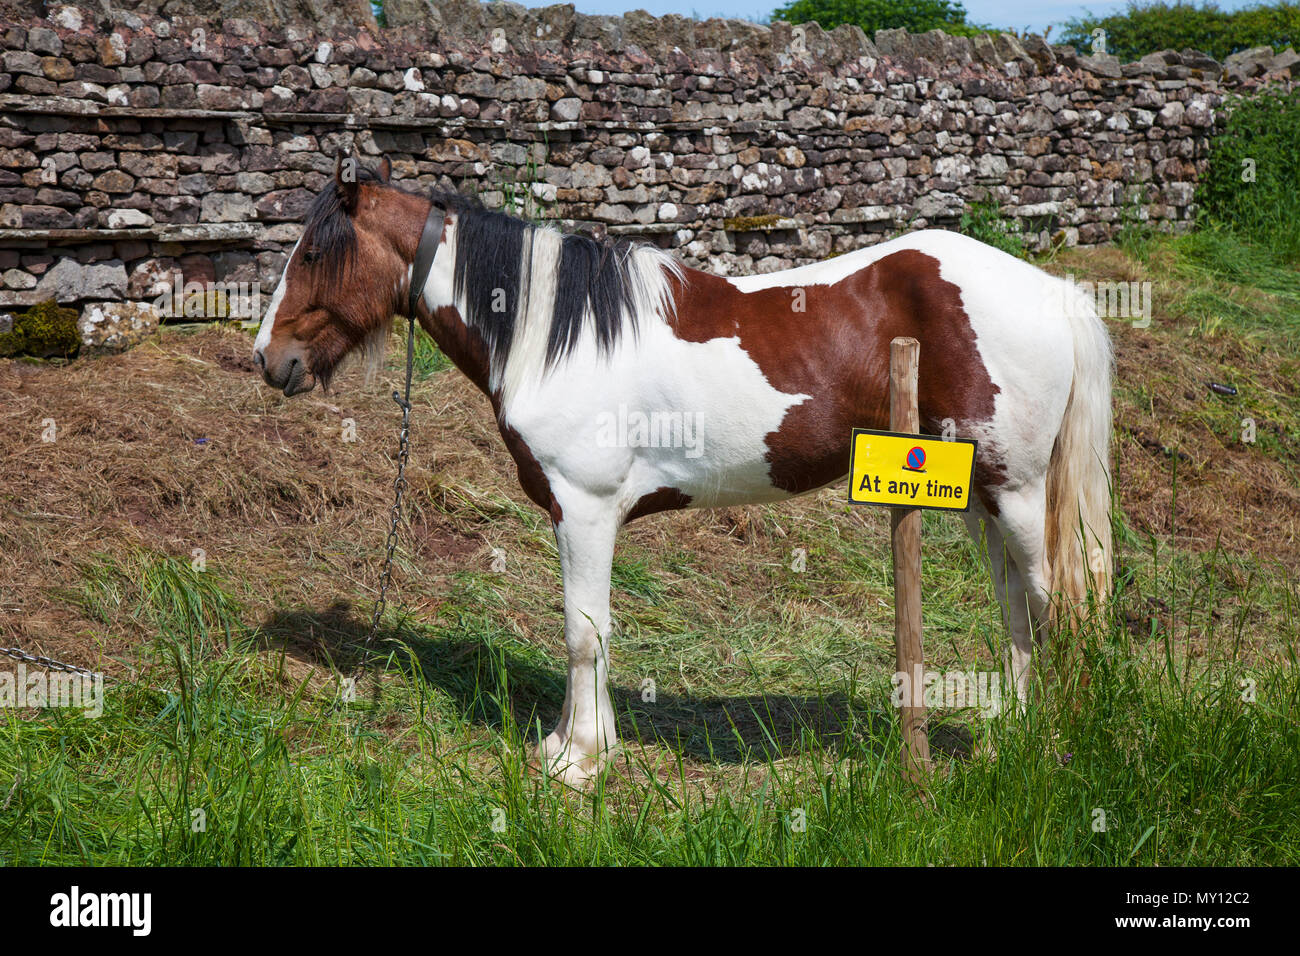 Kirkby Stephen, Cumbria, UK. 5th June, 2018. Weather. 05/06/2018. Members of the travelling community head for Appleby Horse Fair as the roads in Cumbria & the Yorkshire Dales provide grazing for their Cob Horses en-rout to their annual gathering. The horse fair is held each year in early June. It attracts about 10,000 Gypsies and Travellers and about 30,000 other people. Rather than an organised event with a set programme, it's billed as the biggest traditional Gypsy Fair in Europe, one that's like a big family get together. Credit: MediaWorldImas/AlamyLiveNews Stock Photo